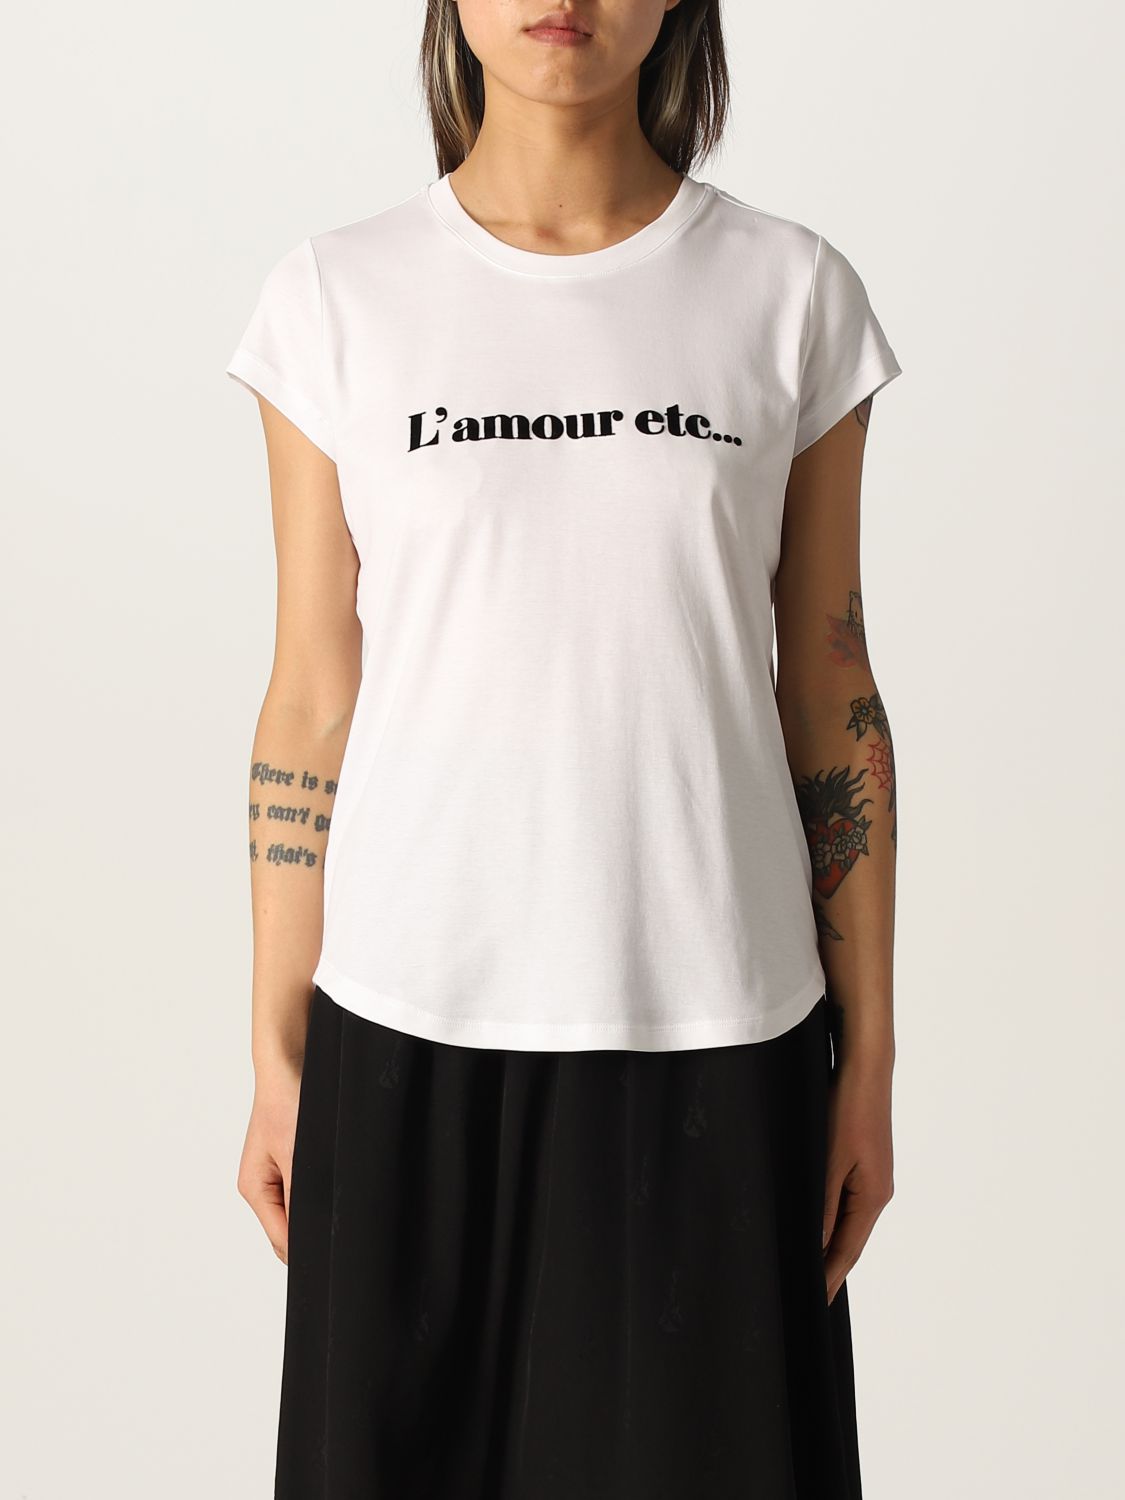 ZADIG & VOLTAIRE: T-shirt with print - White | Zadig & Voltaire t-shirt ...